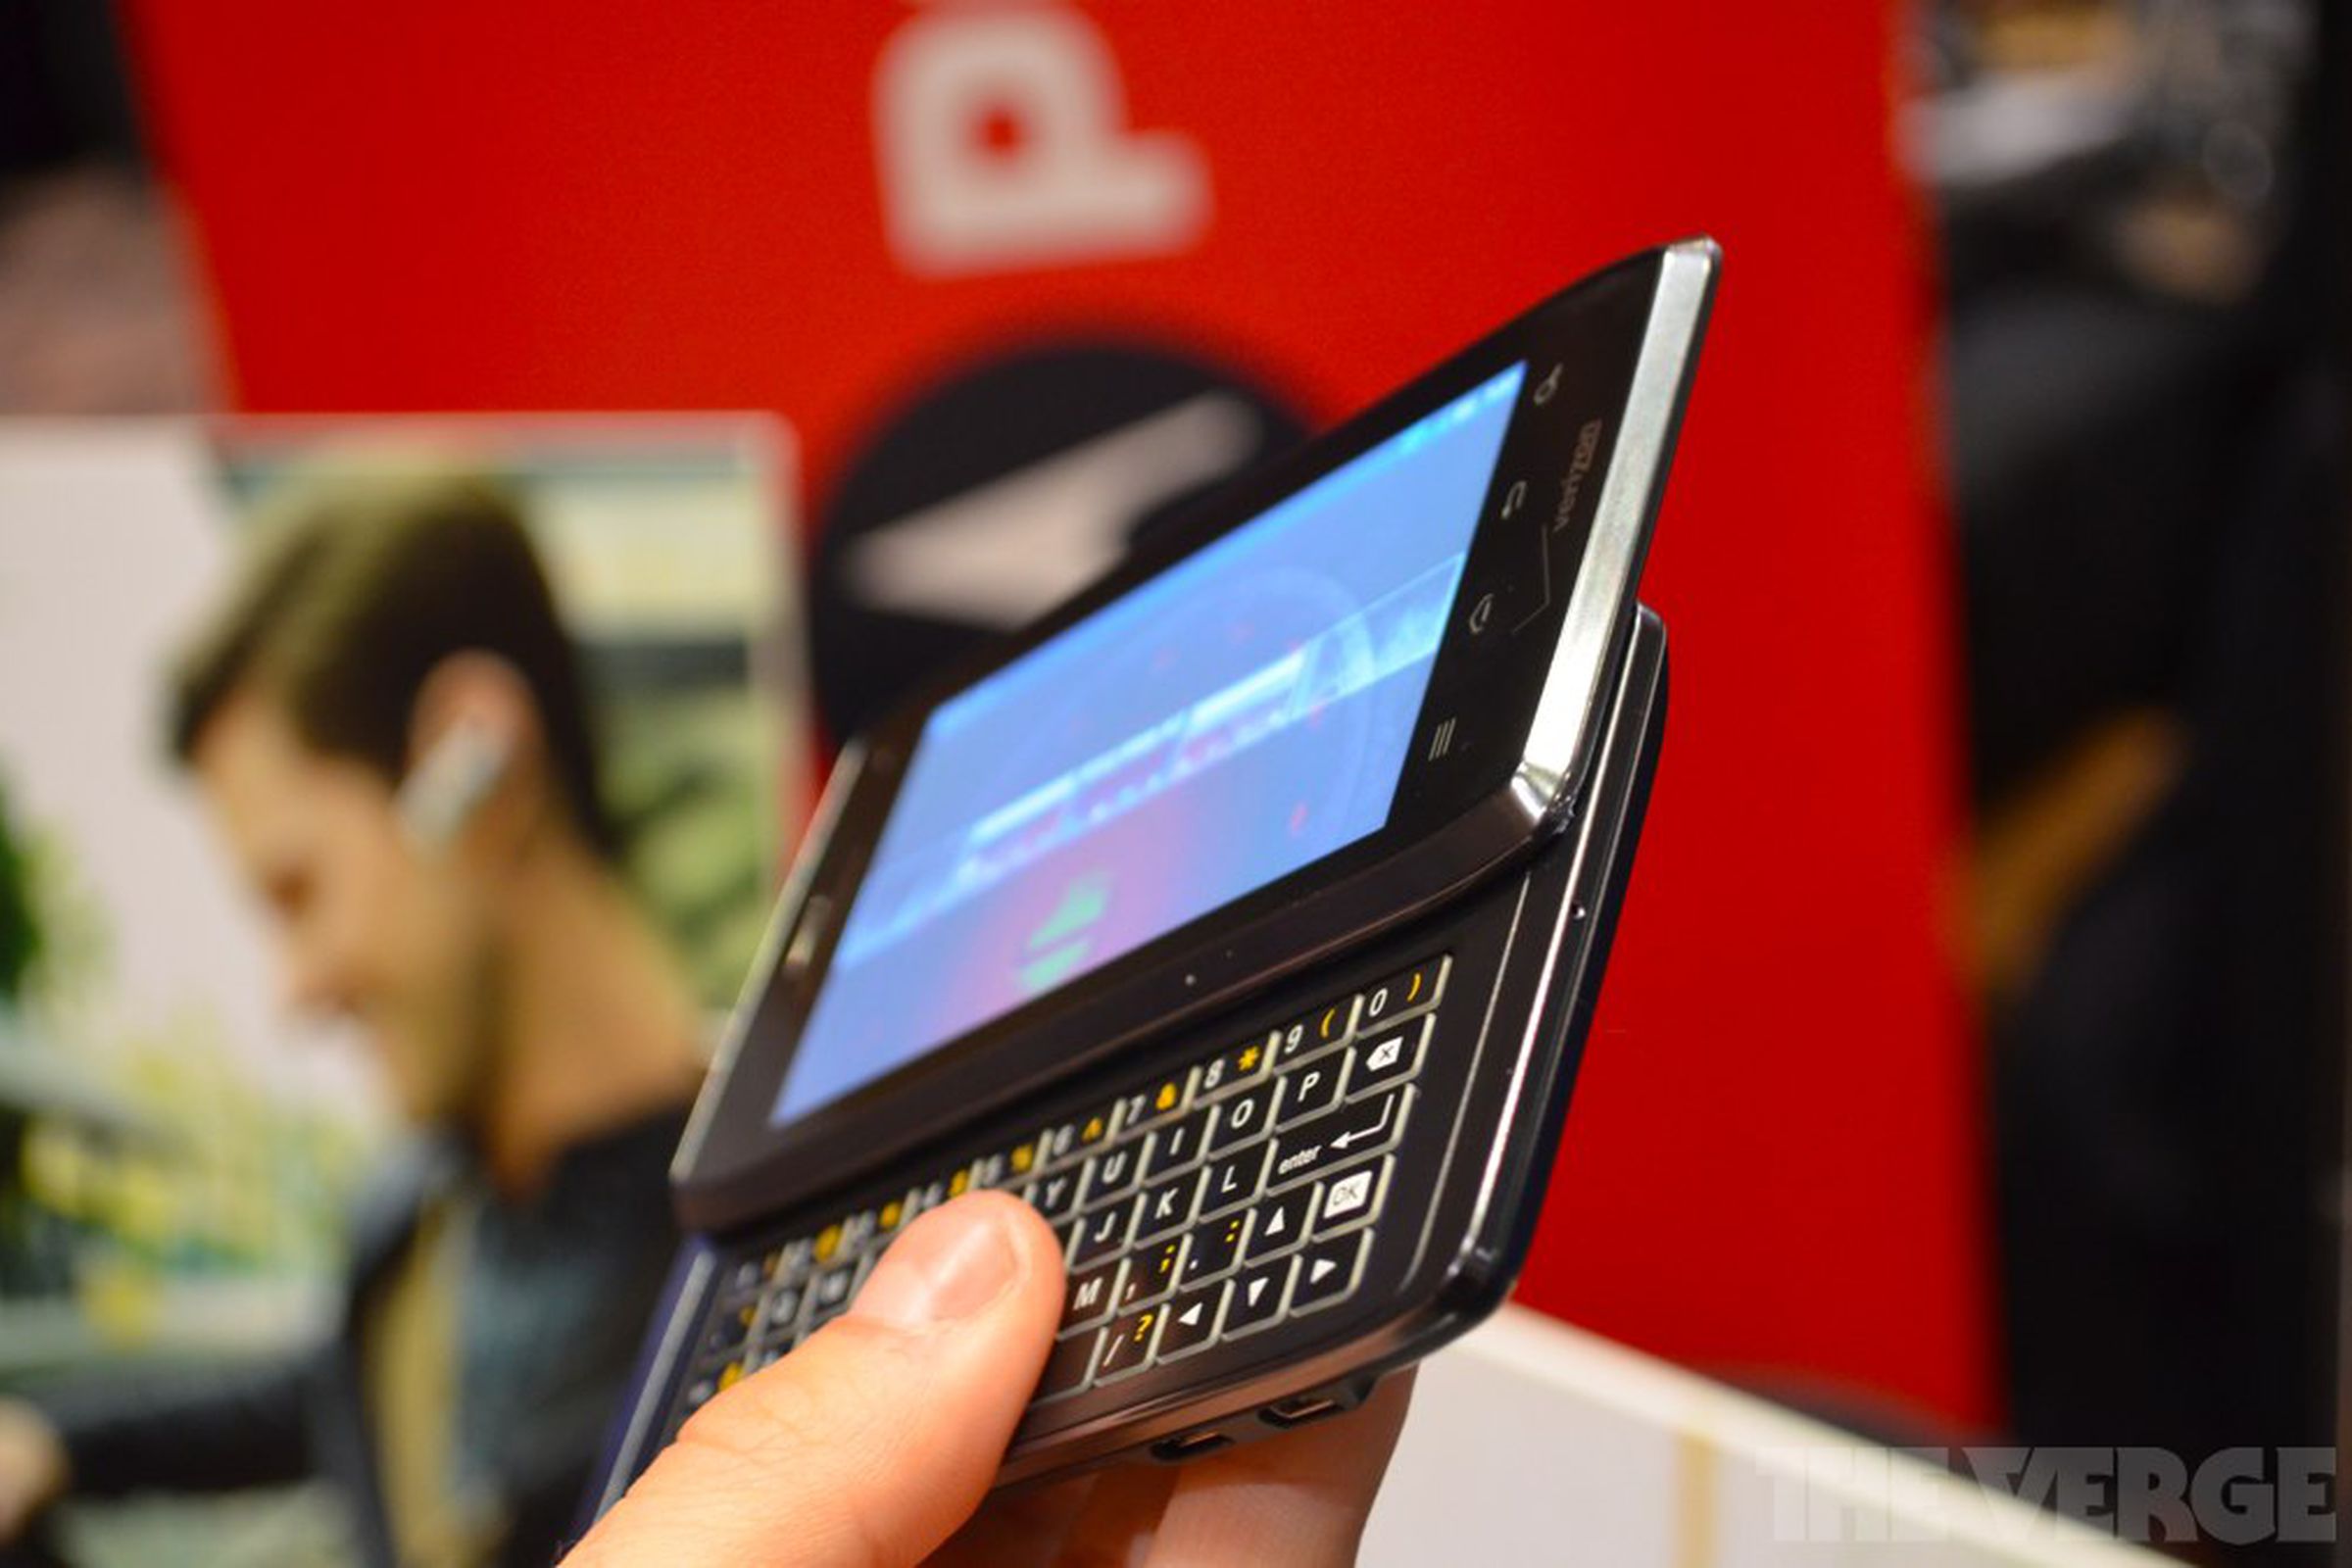 Gallery Photo: Motorola Droid 4 hands-on pictures